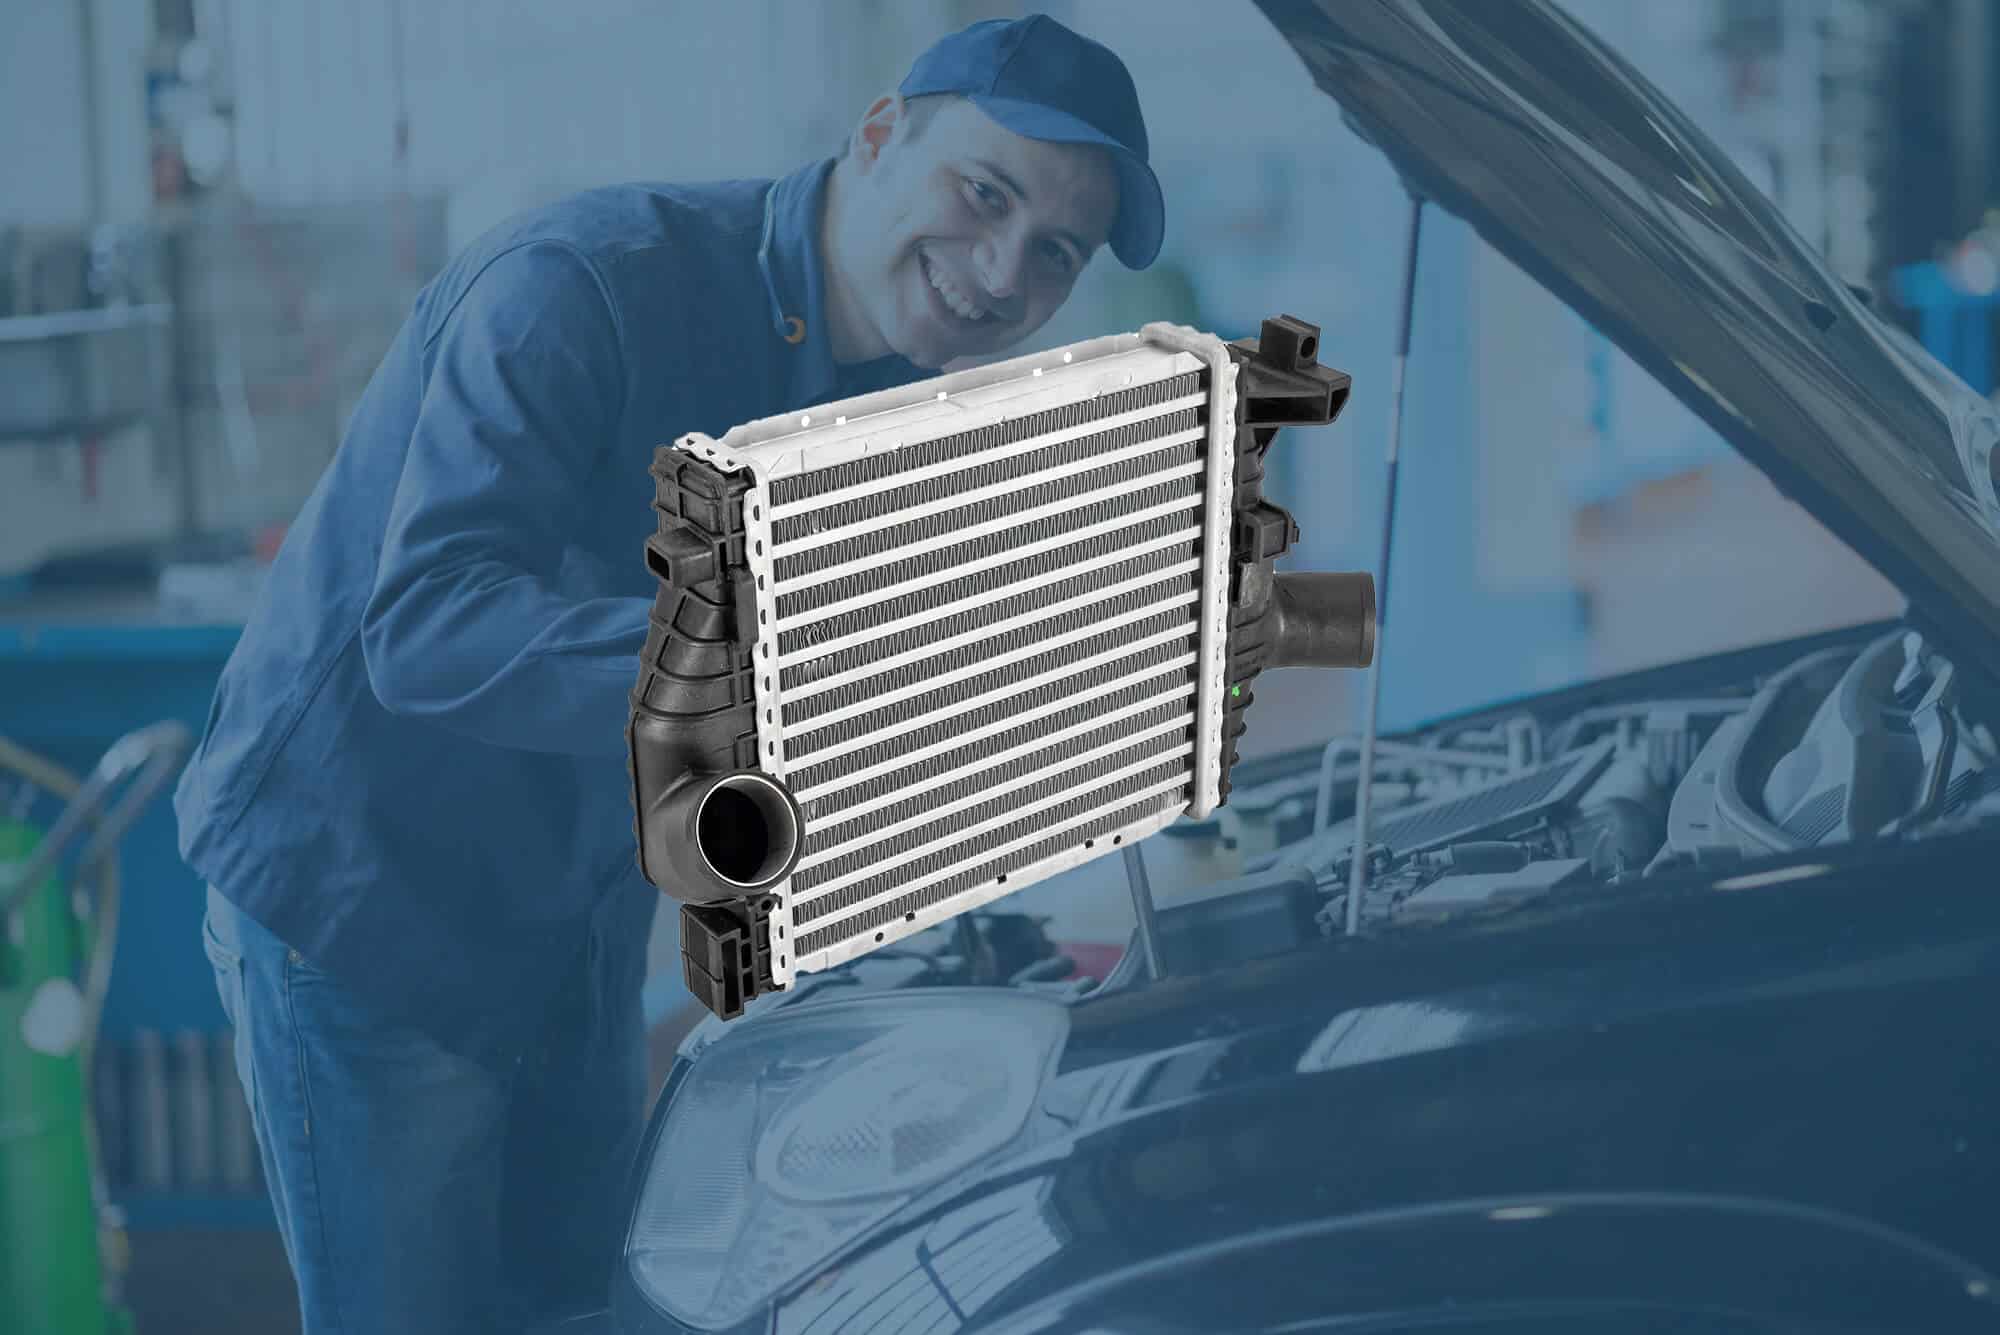 DIY vs. Professional Help: When to Call a Mobile Mechanic for Your Radiator